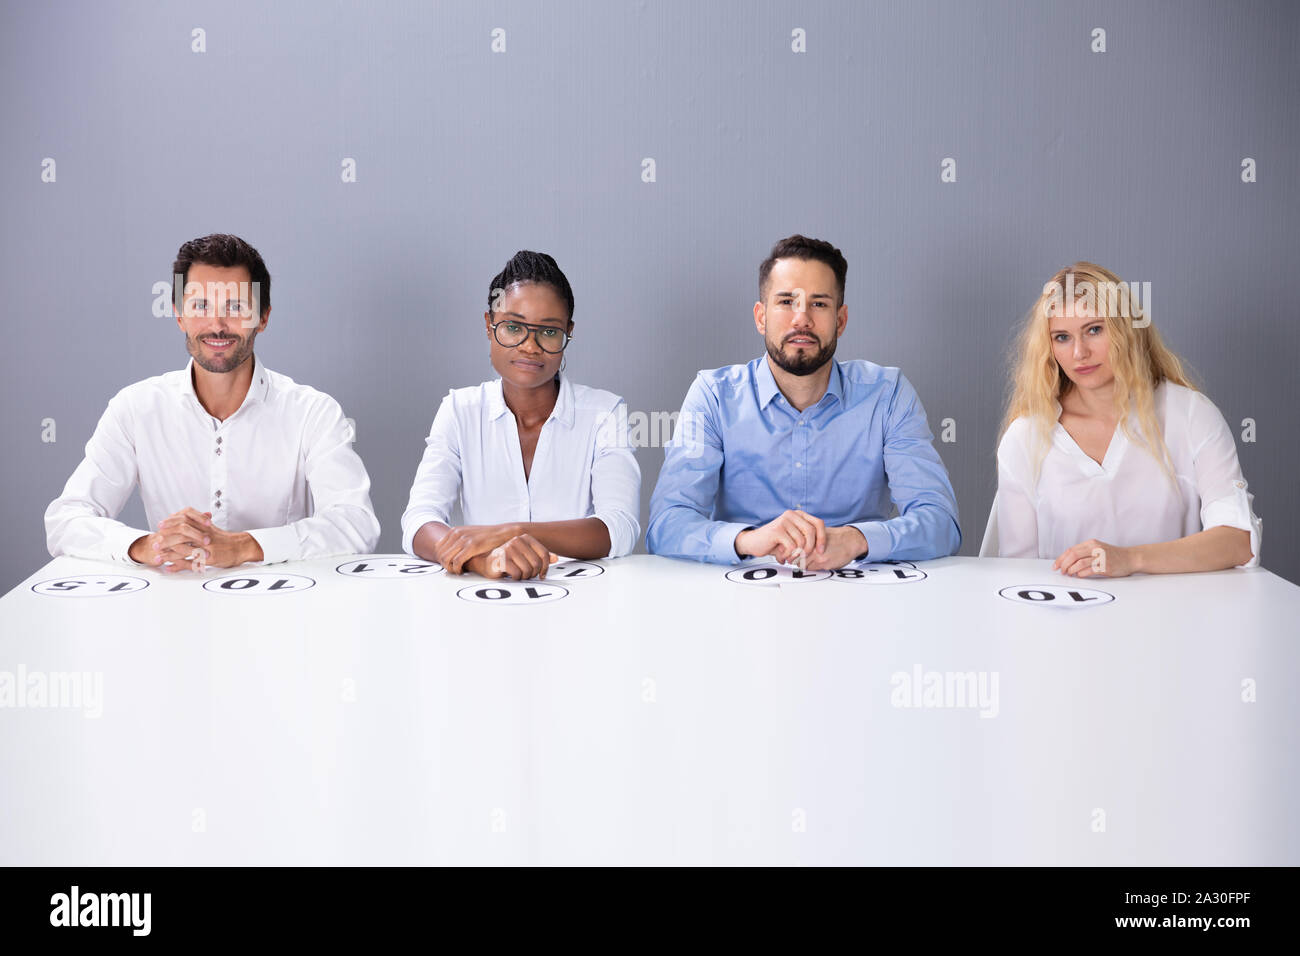 Multiracial Confident Judges Sitting On Chair With Scoring Points On Table Against Wall Stock Photo